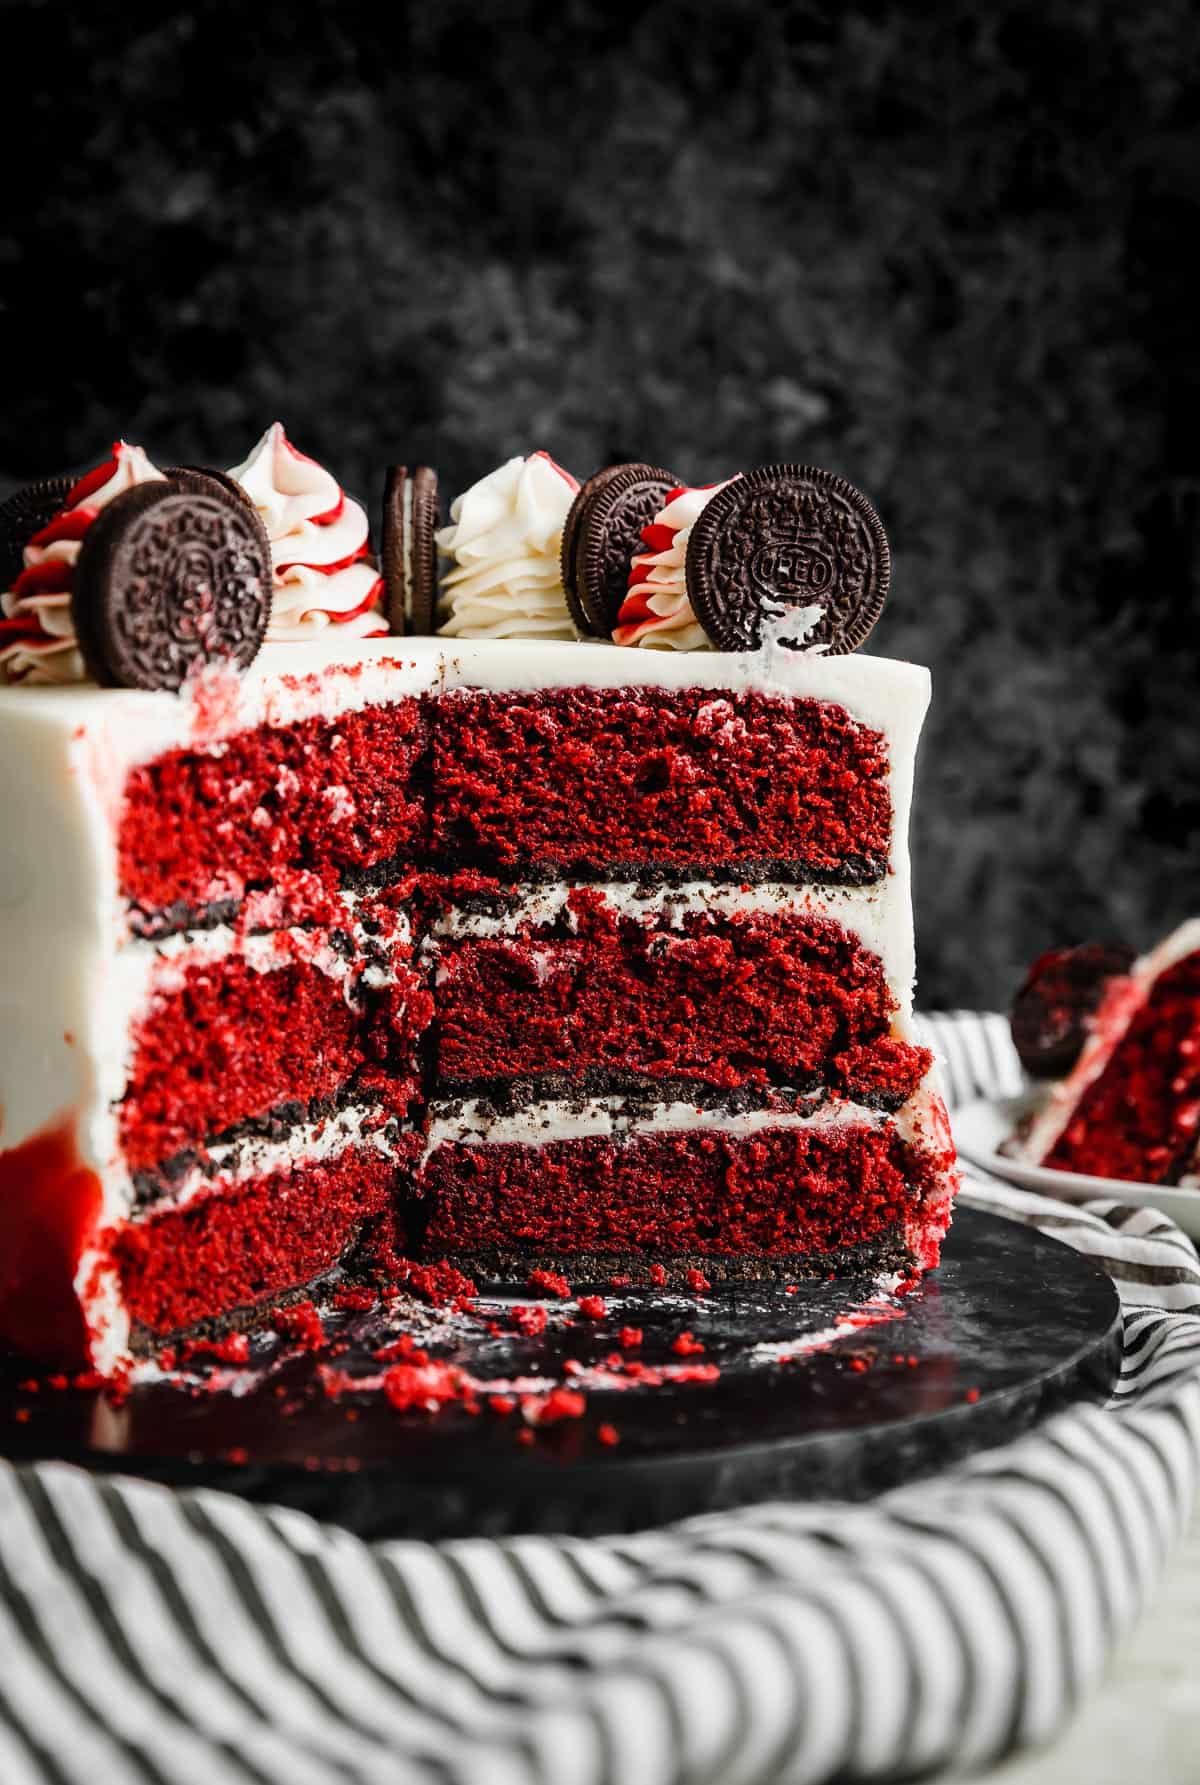 Three tiered Oreo Red Velvet Cake baked on an oreo crust with white cream cheese frosting.